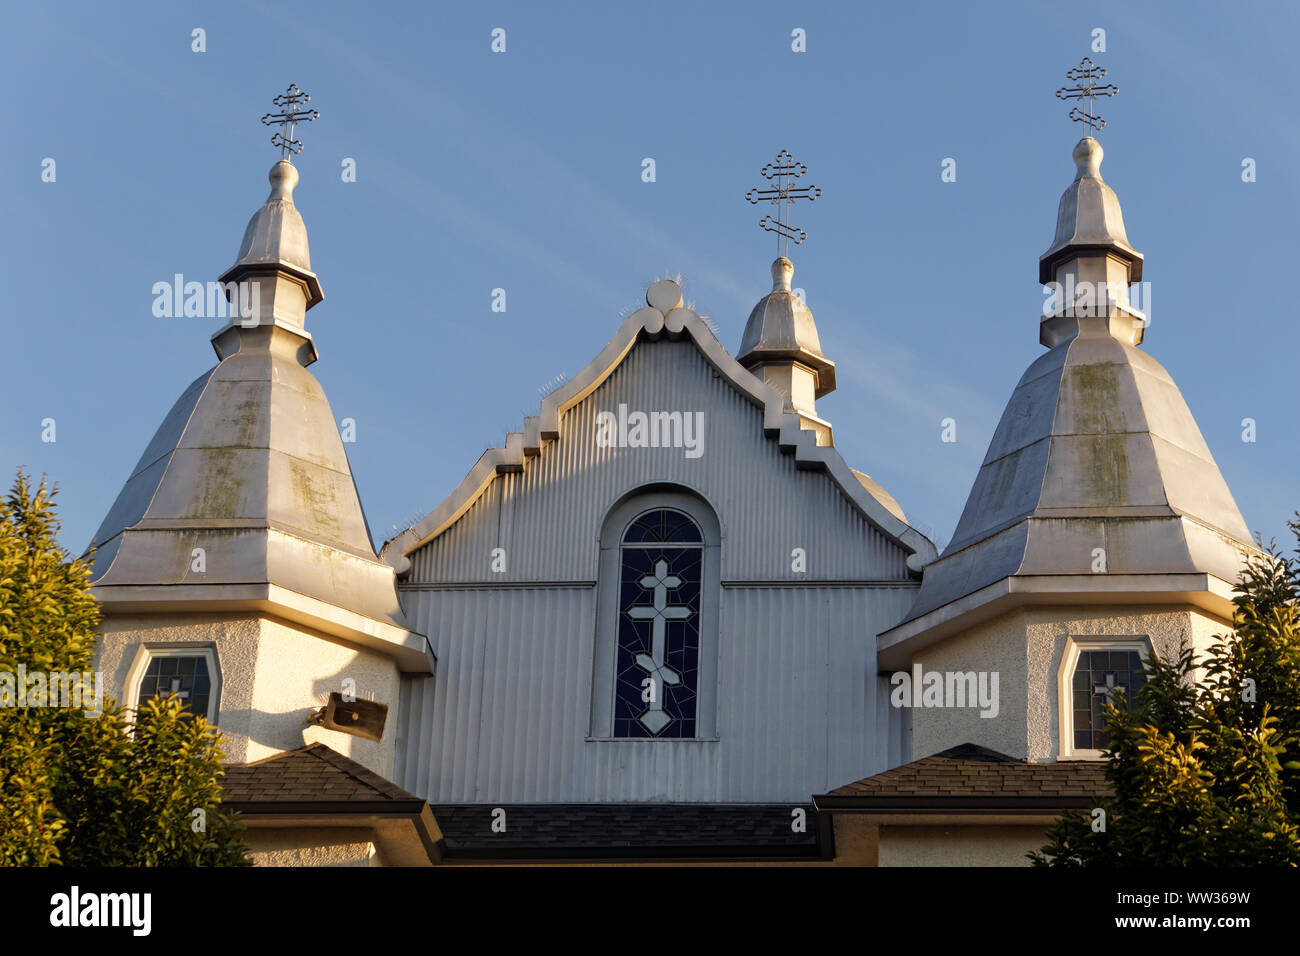 Holy Trinity Ukrainian Orthodox Cathedral facade spires with Russian Orthodox Crosses, Mount Pleasant, Vancouver, British Columbia, Canada Stock Photo